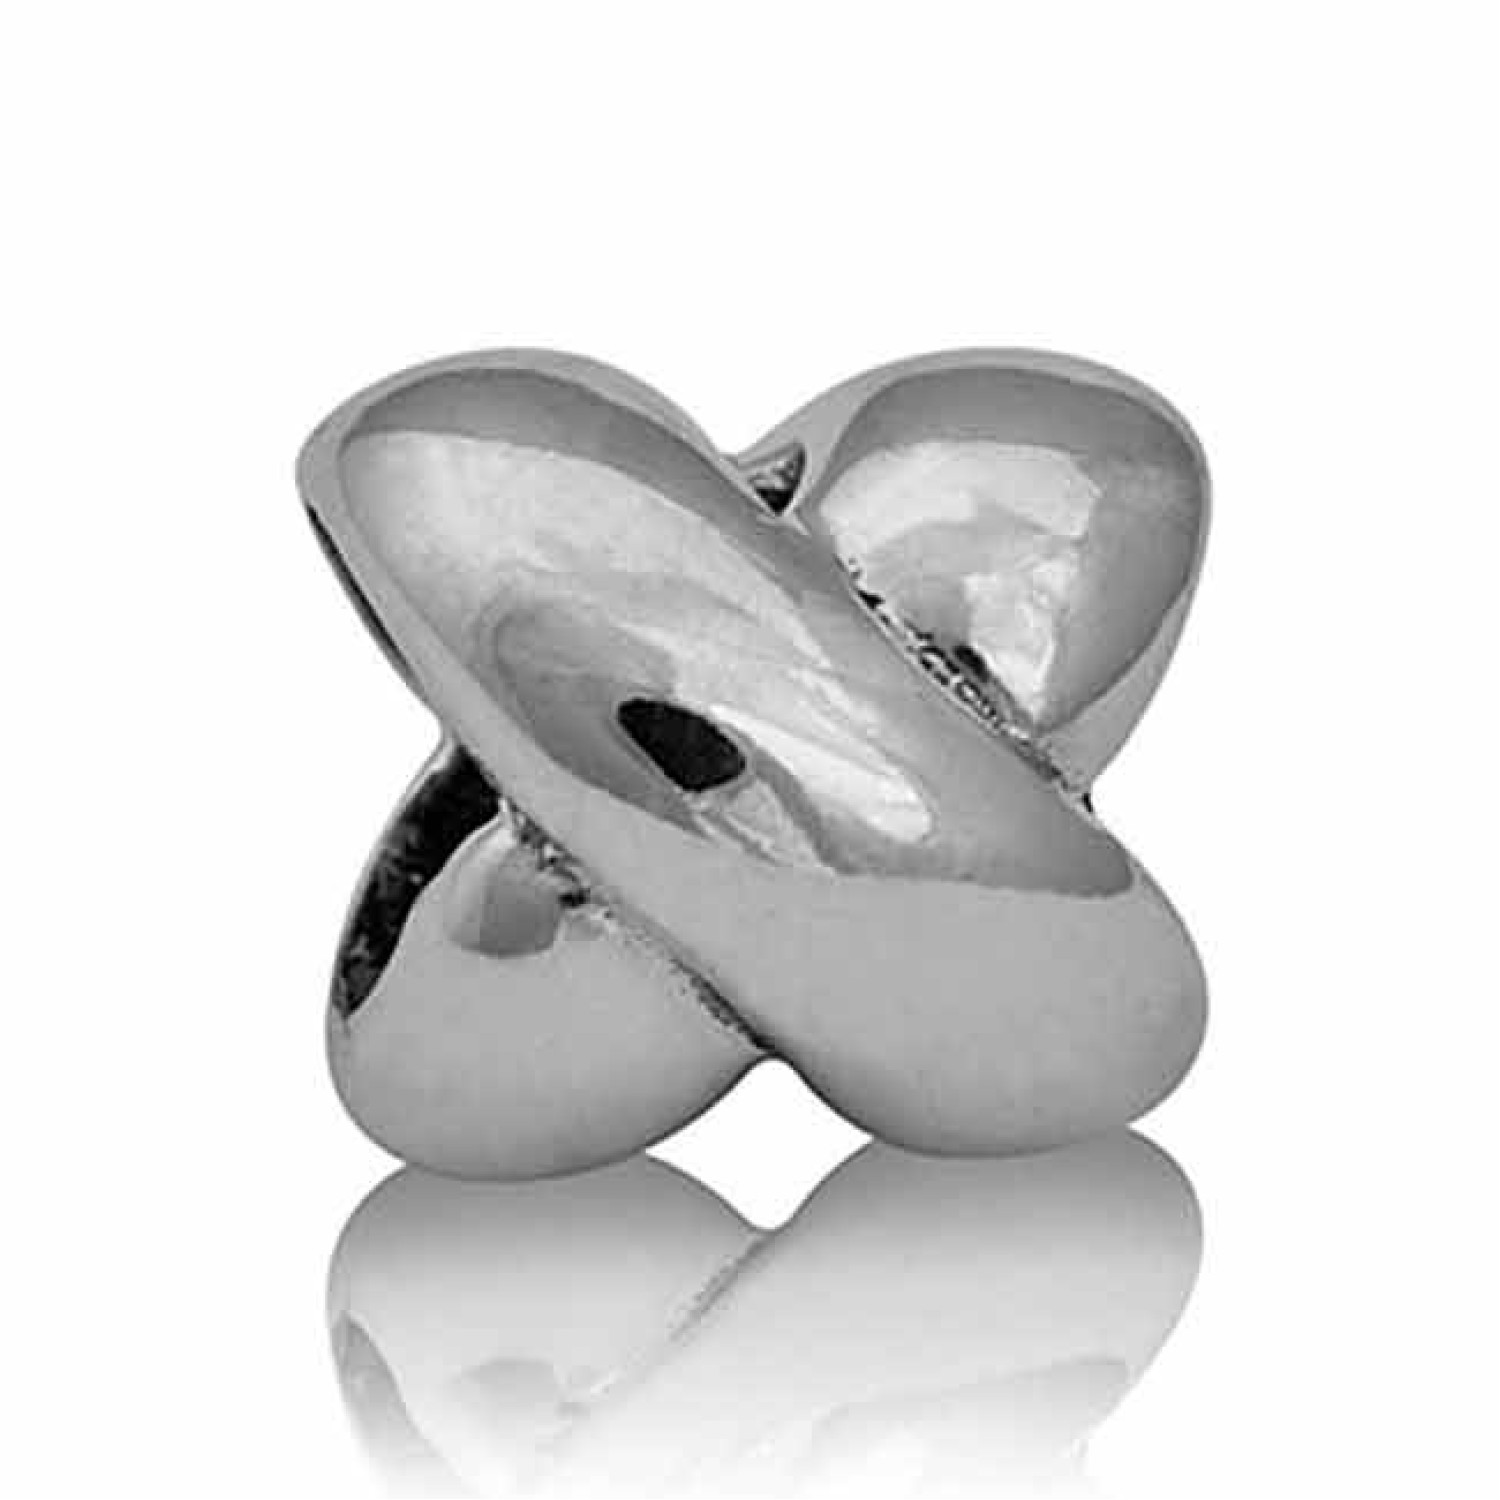 LK137 Evolve Love and Kisses. LK137 Evolve Love and Kisses Silver Charm Our charming kisses design is a symbol of endearment, a sign of friendship, love and affection.  Kisses can mean so many things; a warm greeting or a fond farewell, a gestur @christie